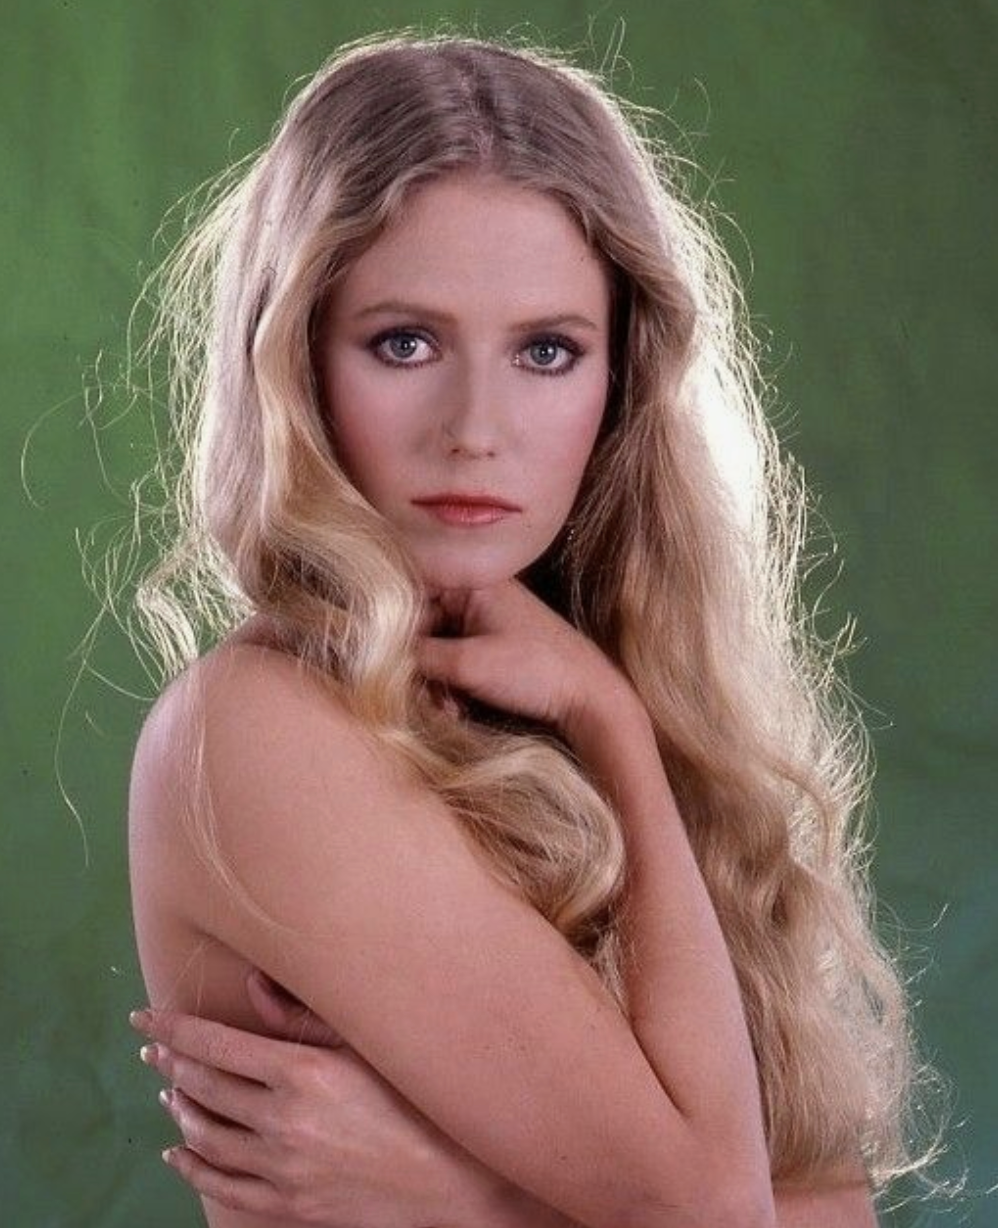 Eve Plumb Nude: From The Brady Bunch To Prostitute.